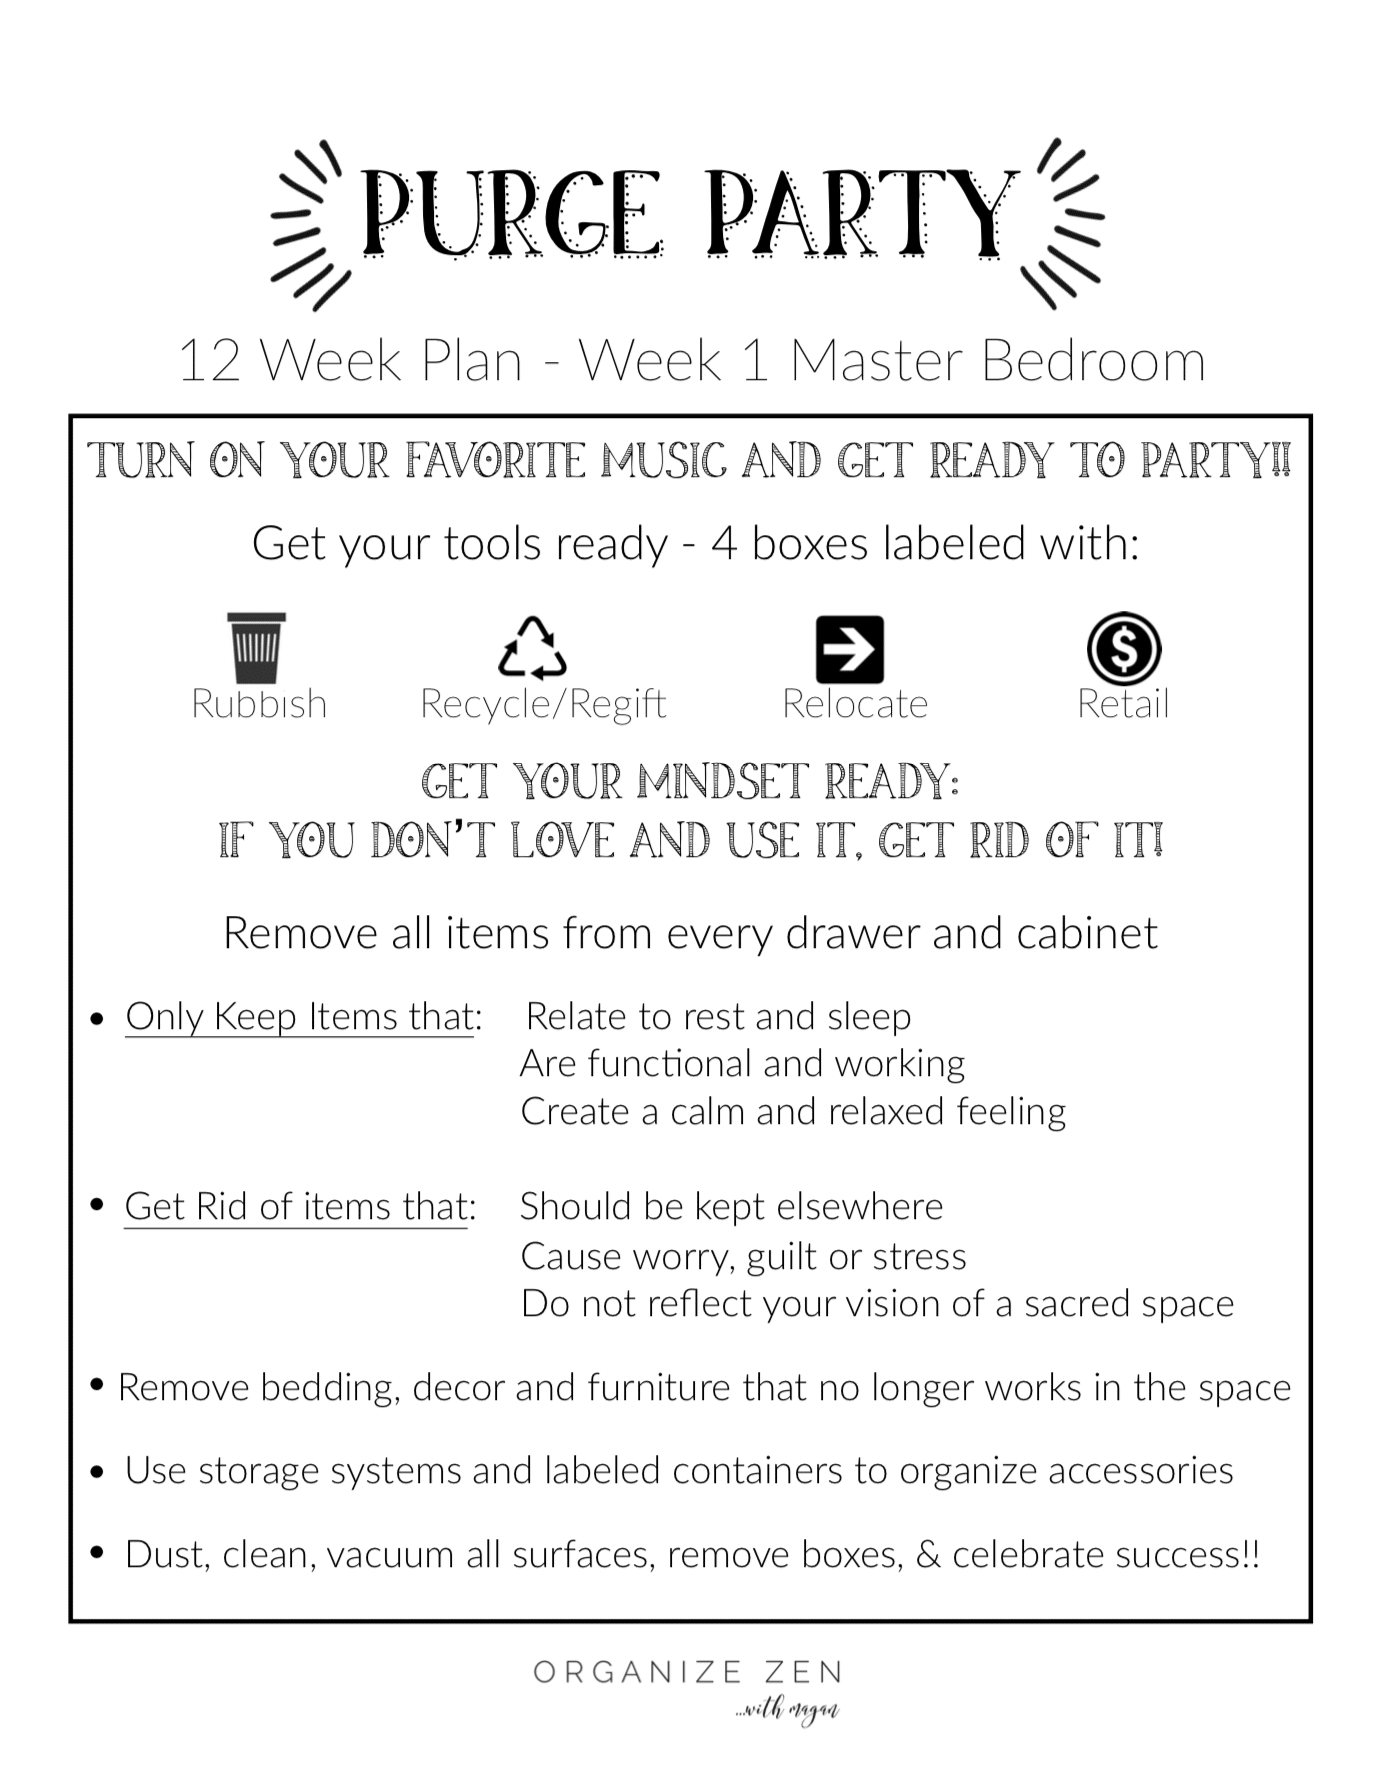 Purge Party printable for Master Bedroom